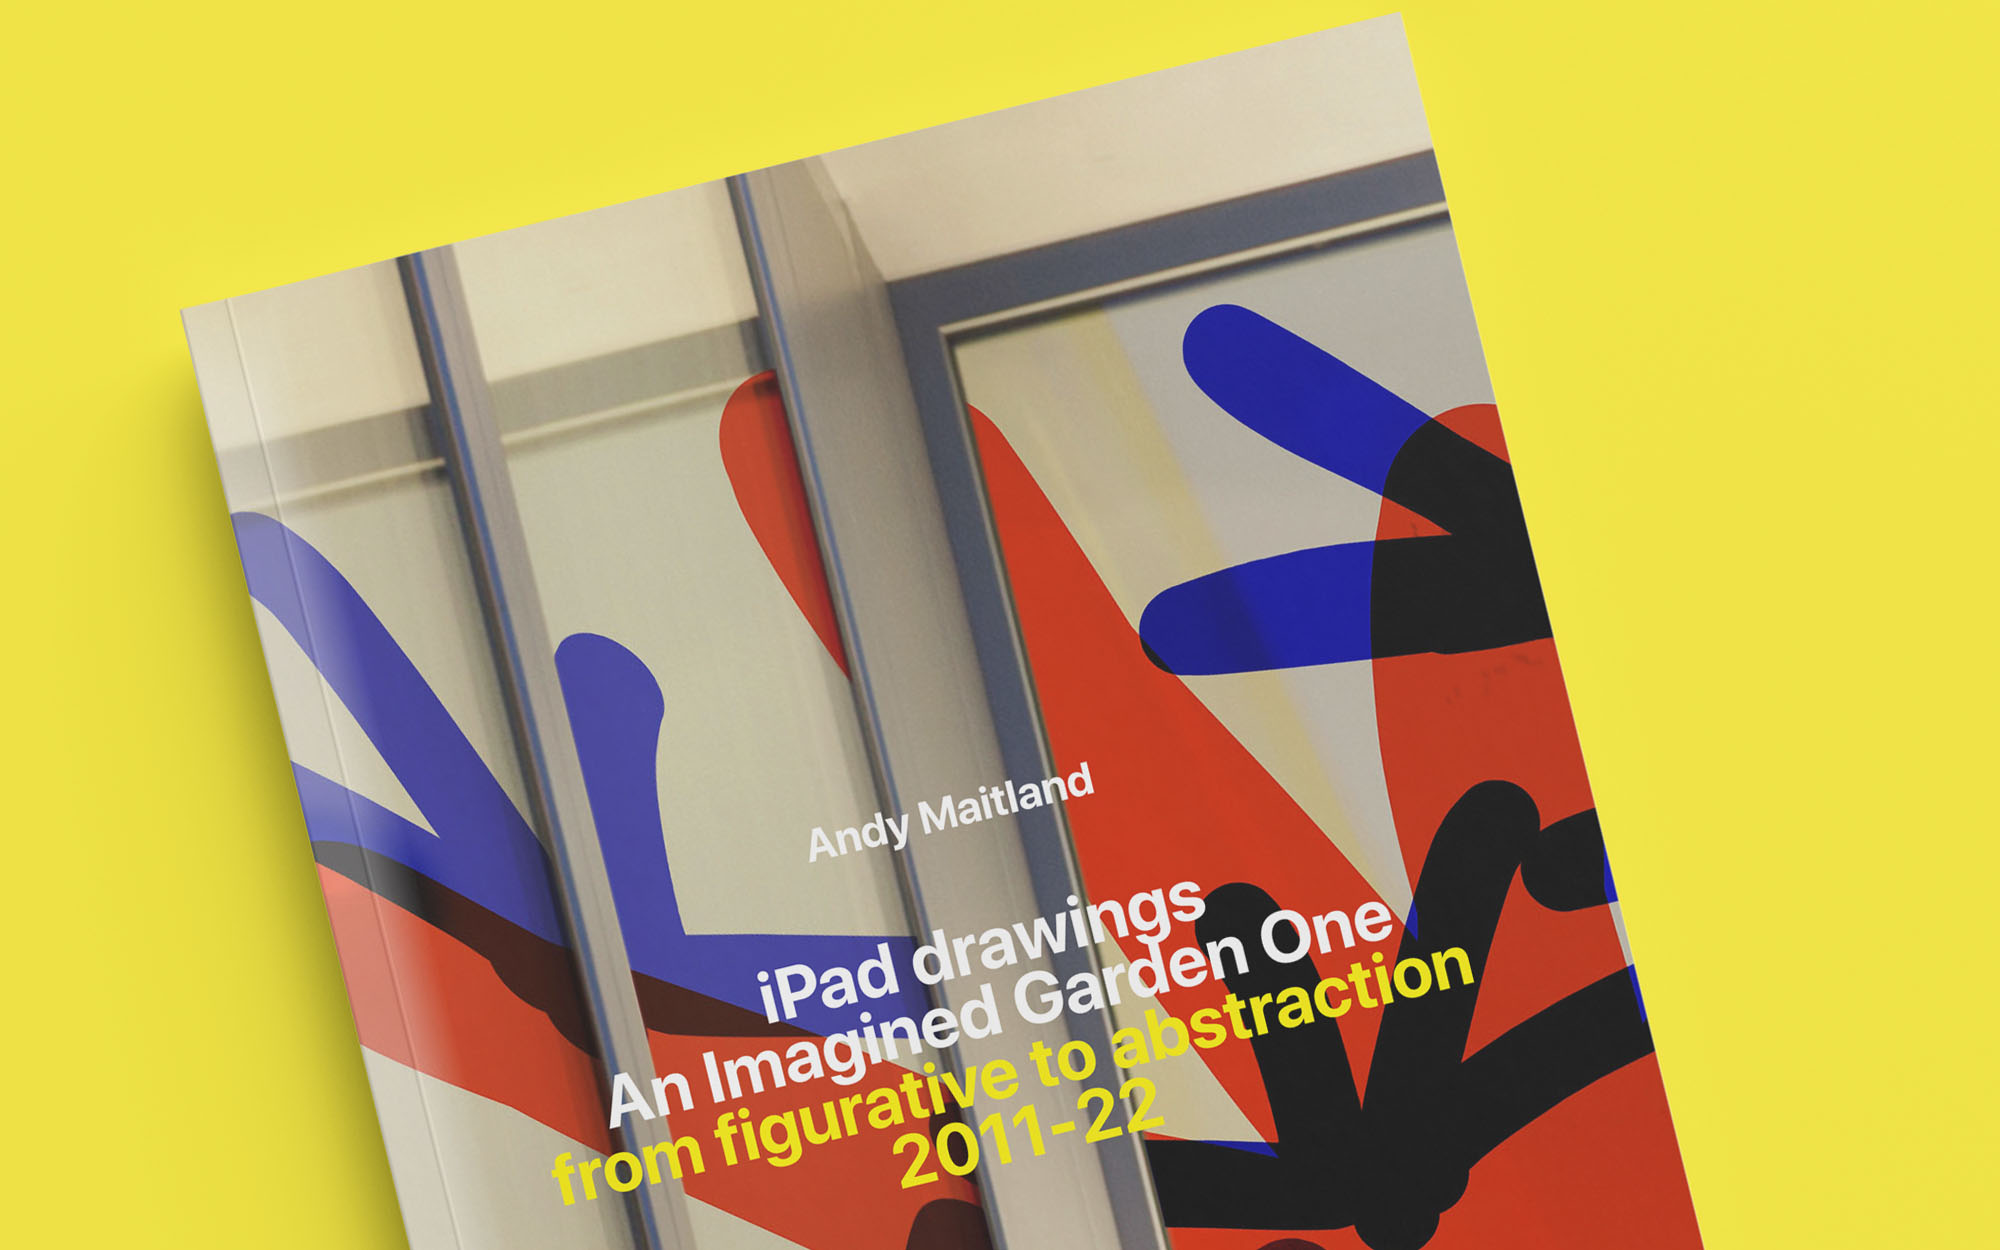 'Andy Maitland, iPad drawings, An Imagined Garden One, from figurative to abstraction 2011-22' new book